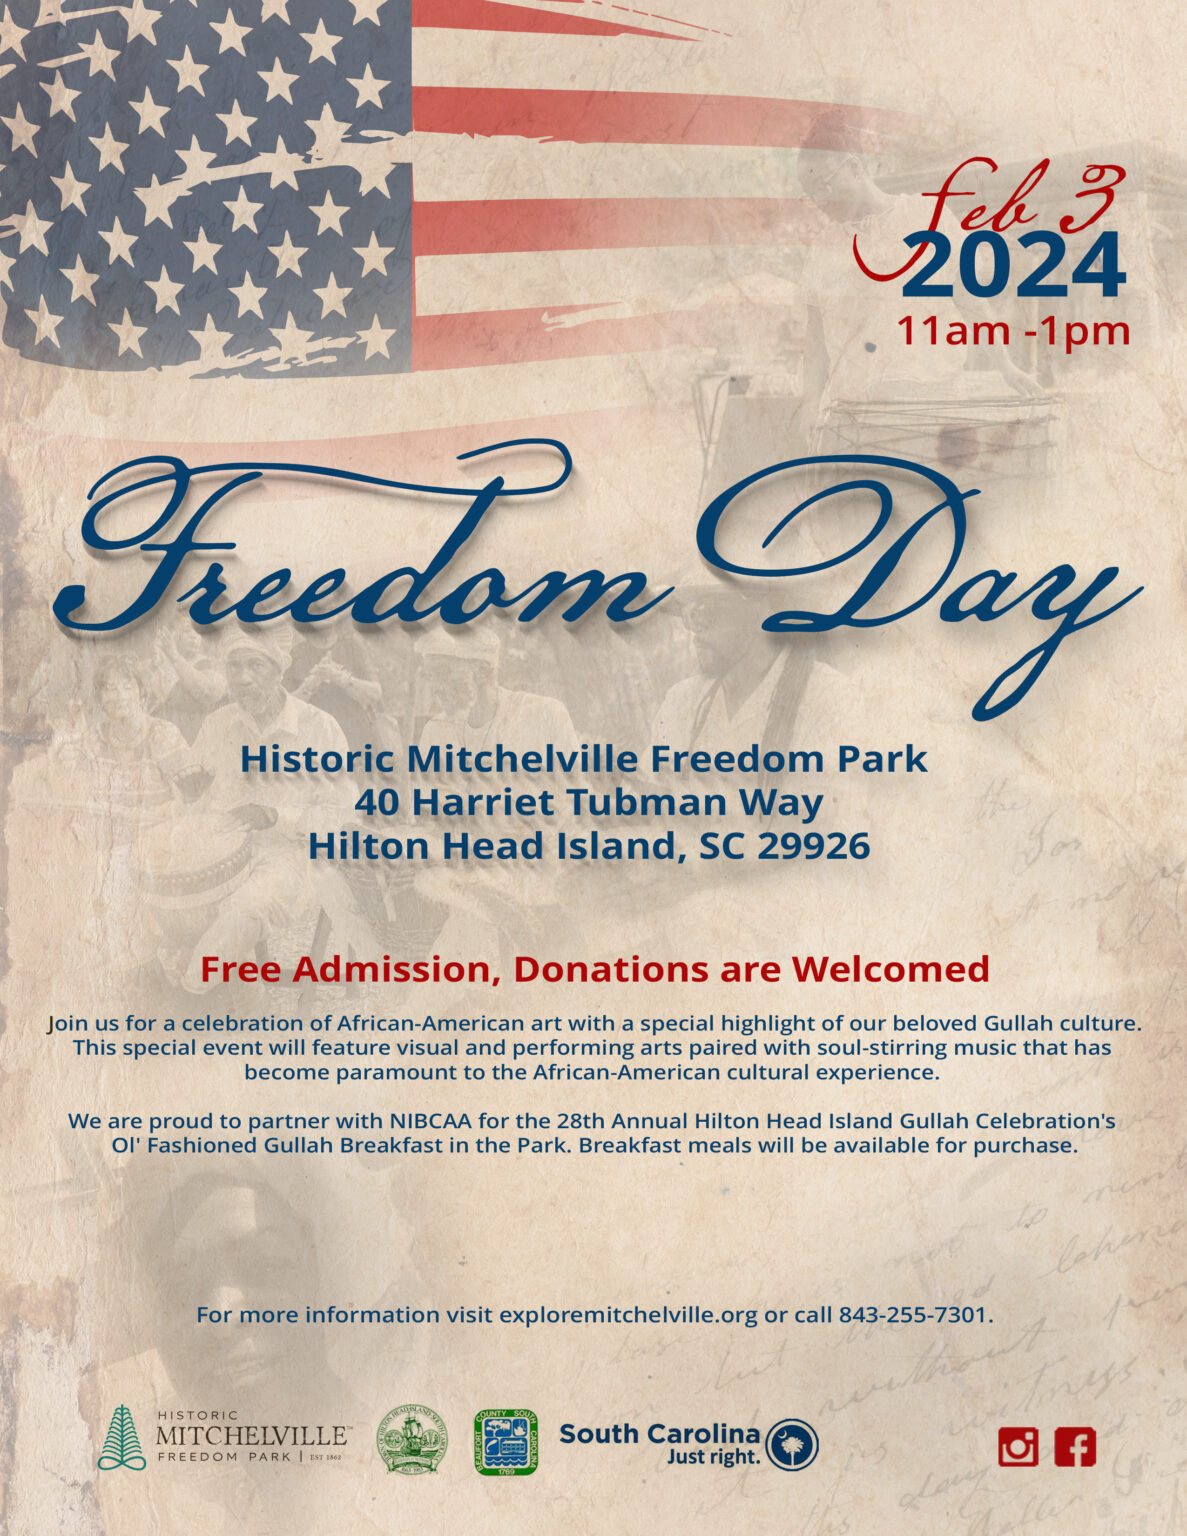 2024 Freedom Day Poster - Free Admission, Donations are Welcomed. Join us for a celebration of African-American art with a special highlight of our beloved Gullah culture. This special event will feature visual and performing arts paired with soul-stirring music that has become paramount to the African-American cultural experience. We are proud to partner with NIBCAA for the 28th Annual Hilton Head Island Gullah Celebration's Ol' Fashioned Gullah Breakfast in the Park. Breakfast meals will be available for purchase. For more information visit exploremitchelville.org or call 843-255-7301